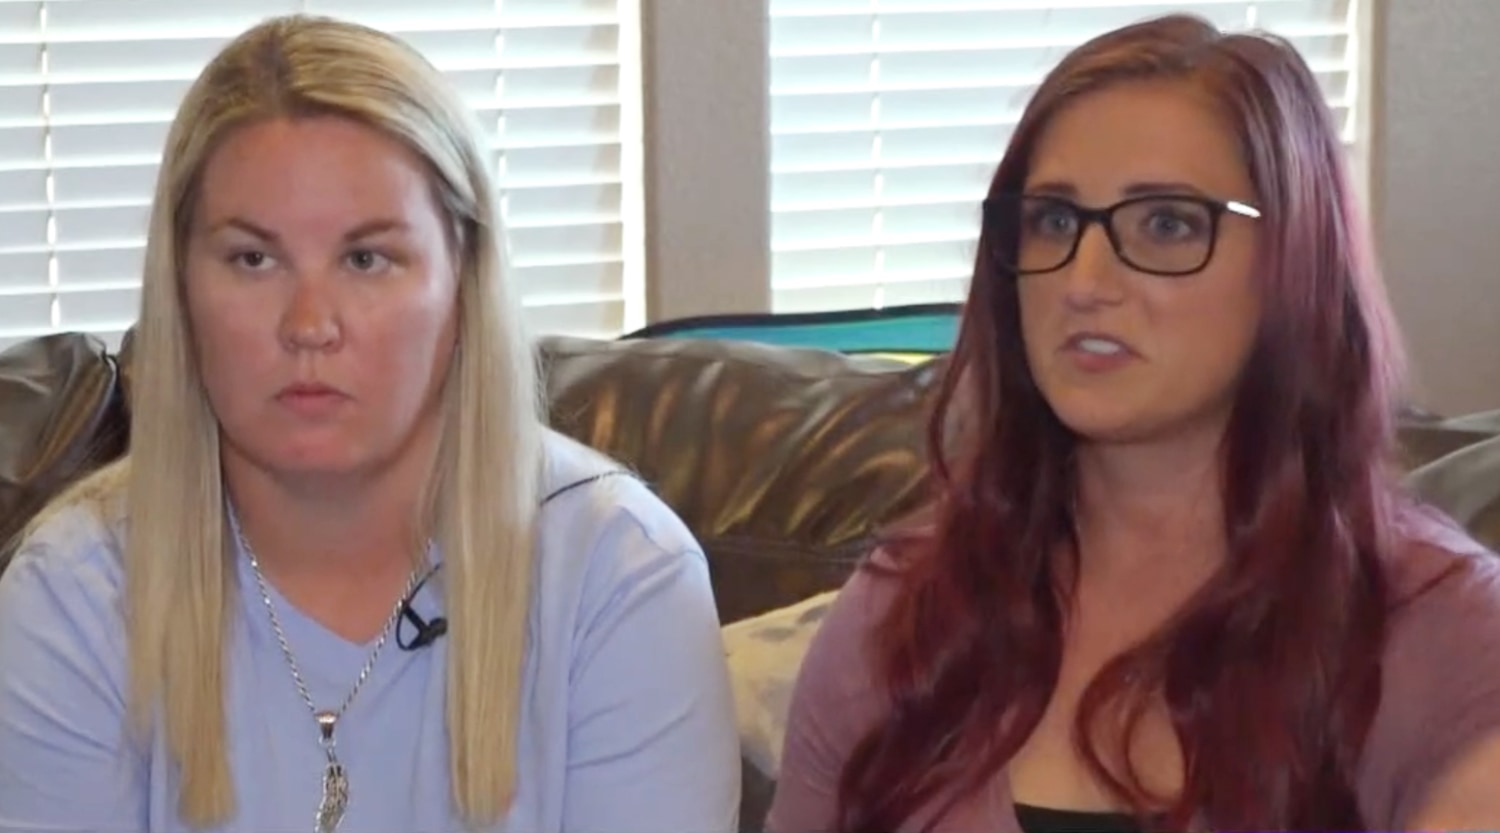 1500px x 833px - Christian day care center rejects child because she has lesbian parents